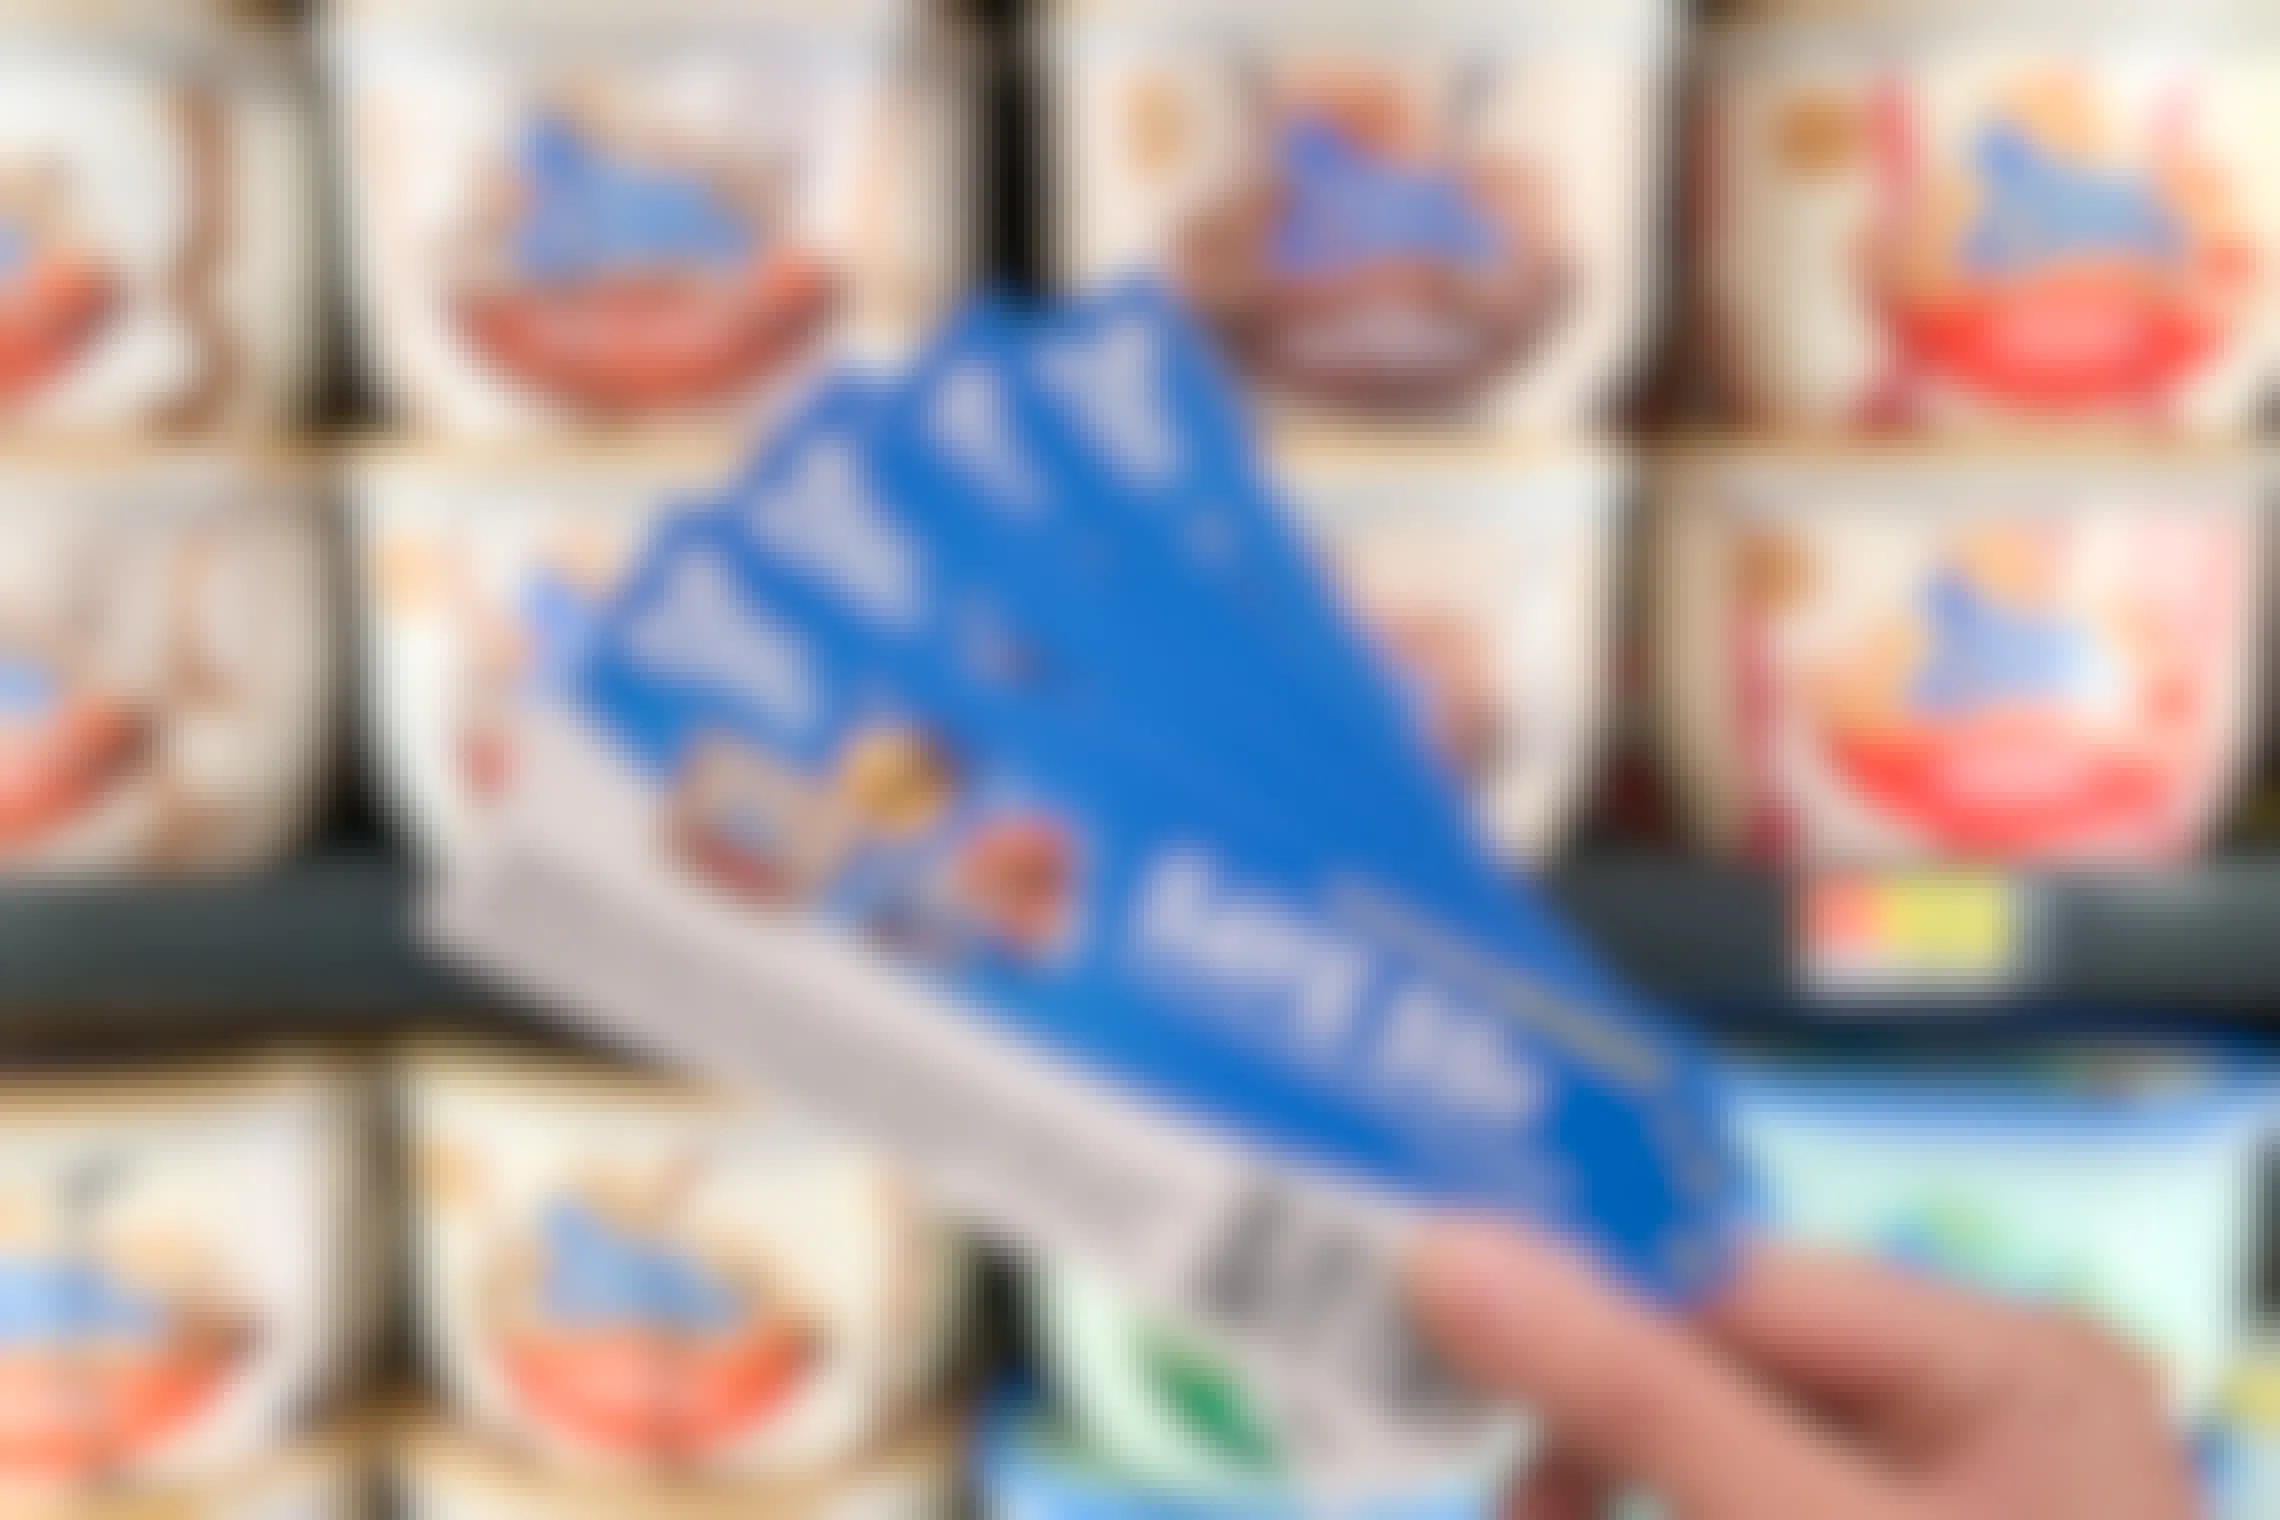 Blue Bunny Ice Cream coupons held in front of ice cream cooler in store.